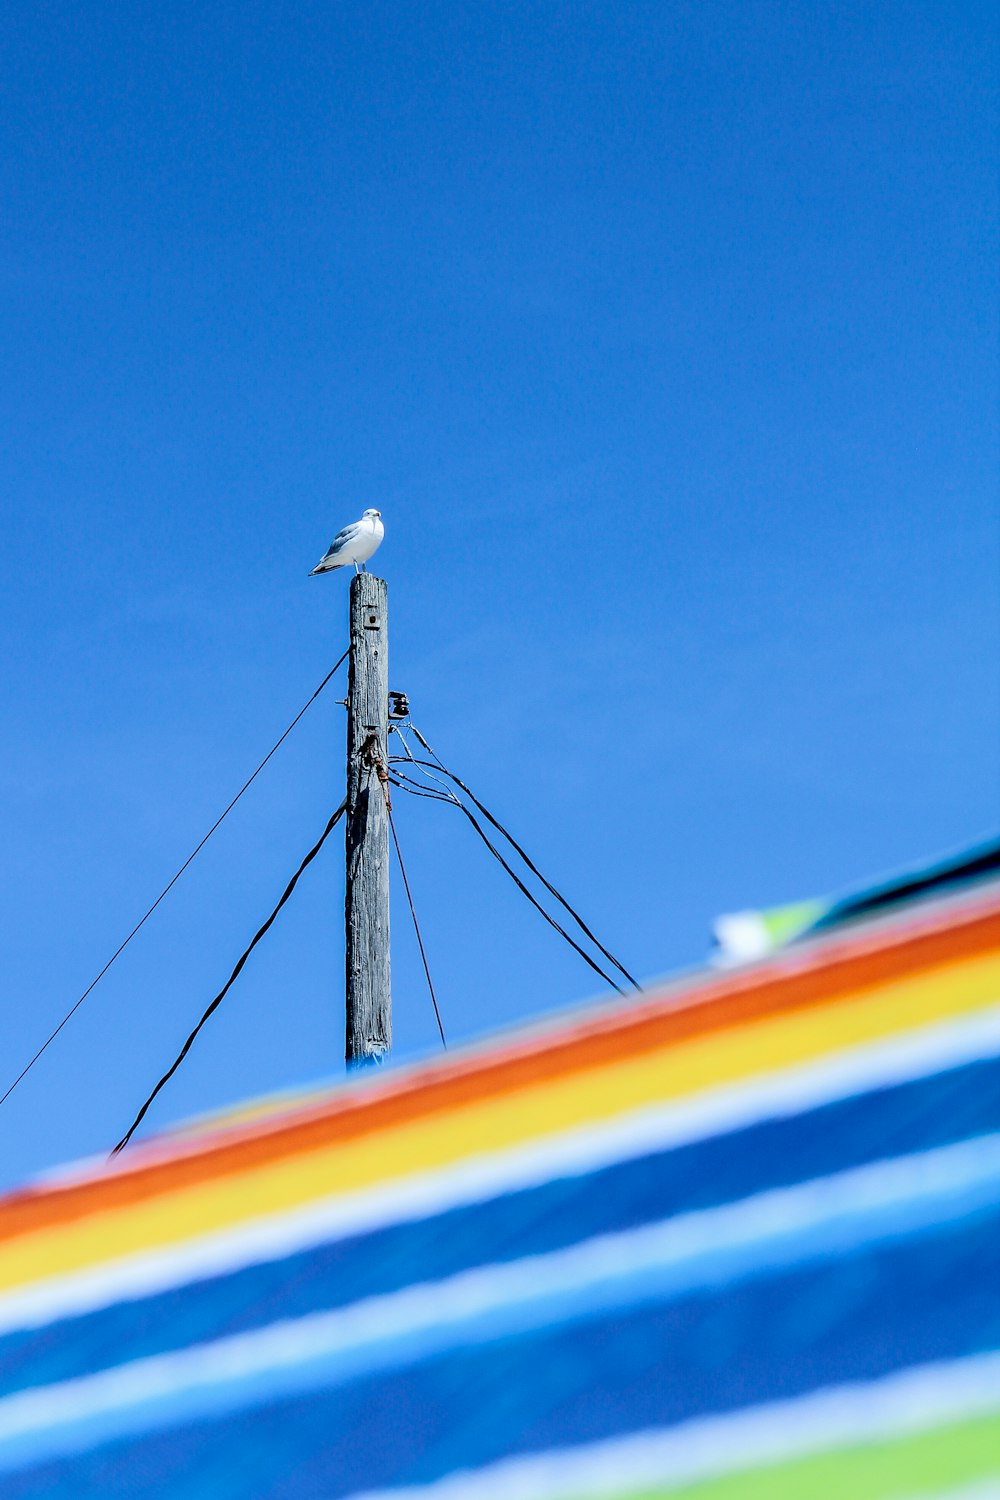 white bird on electric post under blue sky during daytime